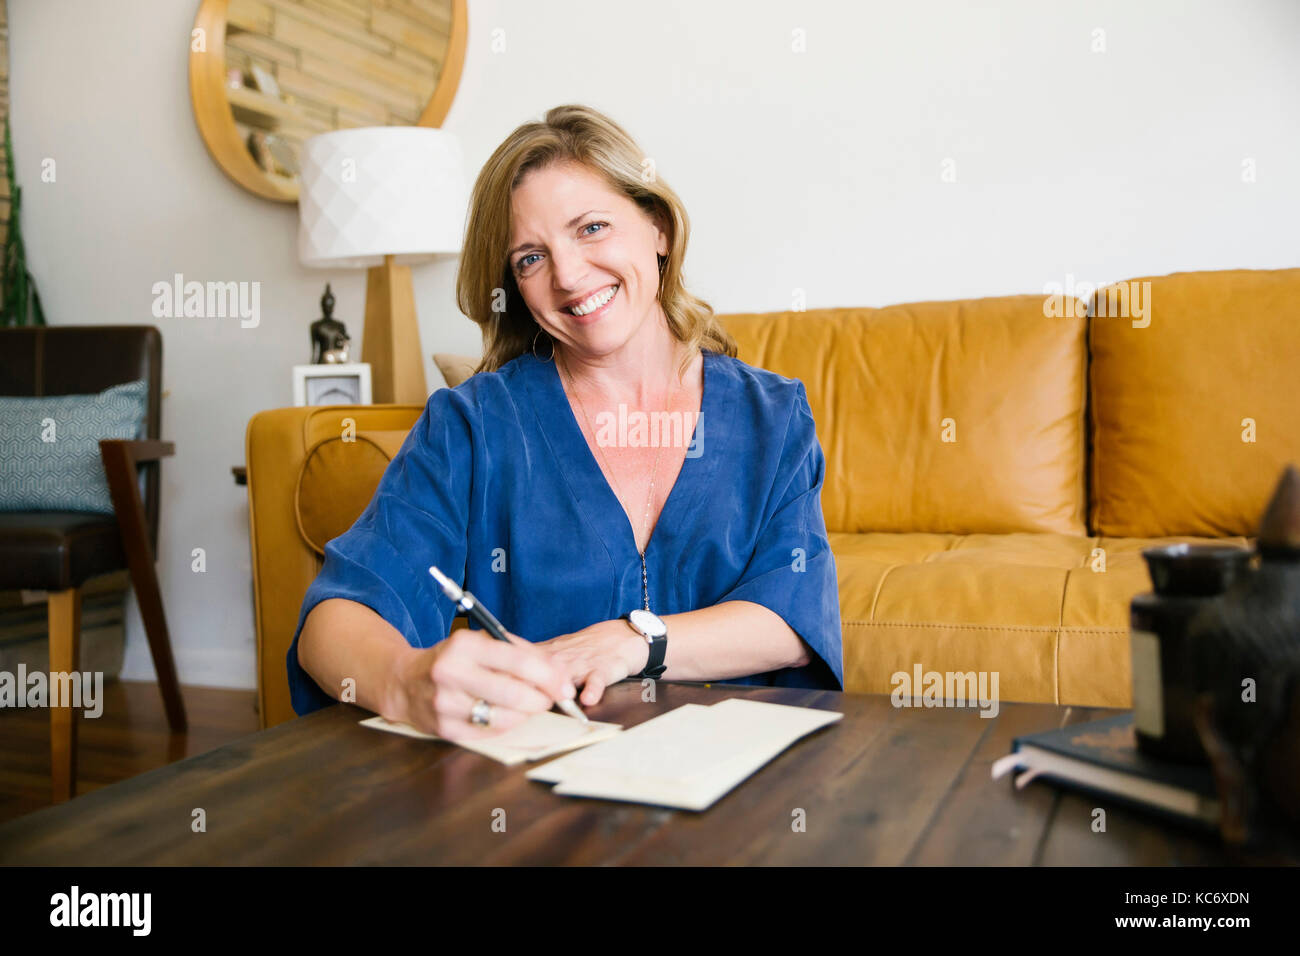 Portrait of woman writing letter in living room Stock Photo